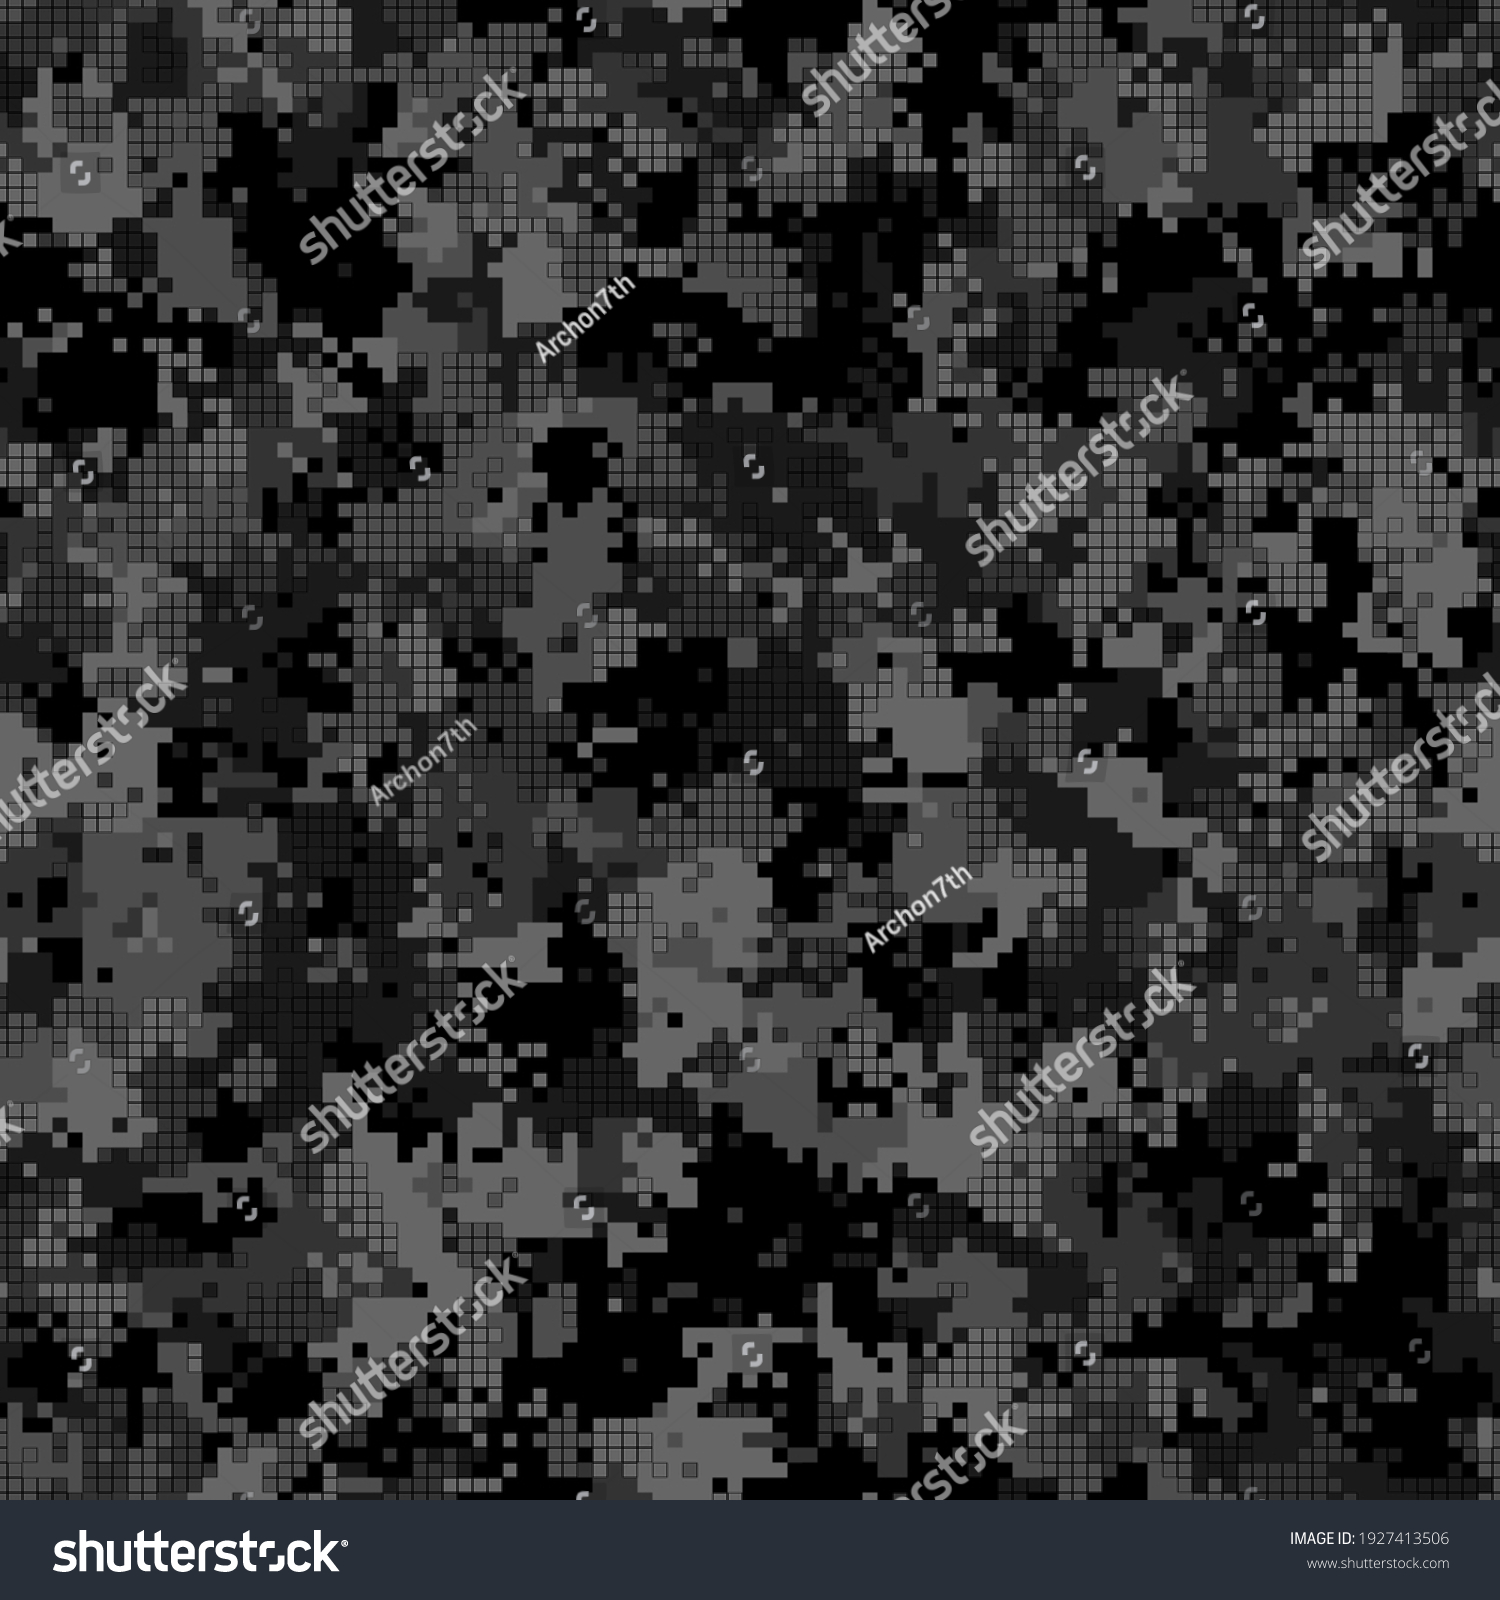 SVG of Digital monochrome dark gray dust camouflage seamless pattern. Abstract military geometric modern camo background. Vector illustration. svg